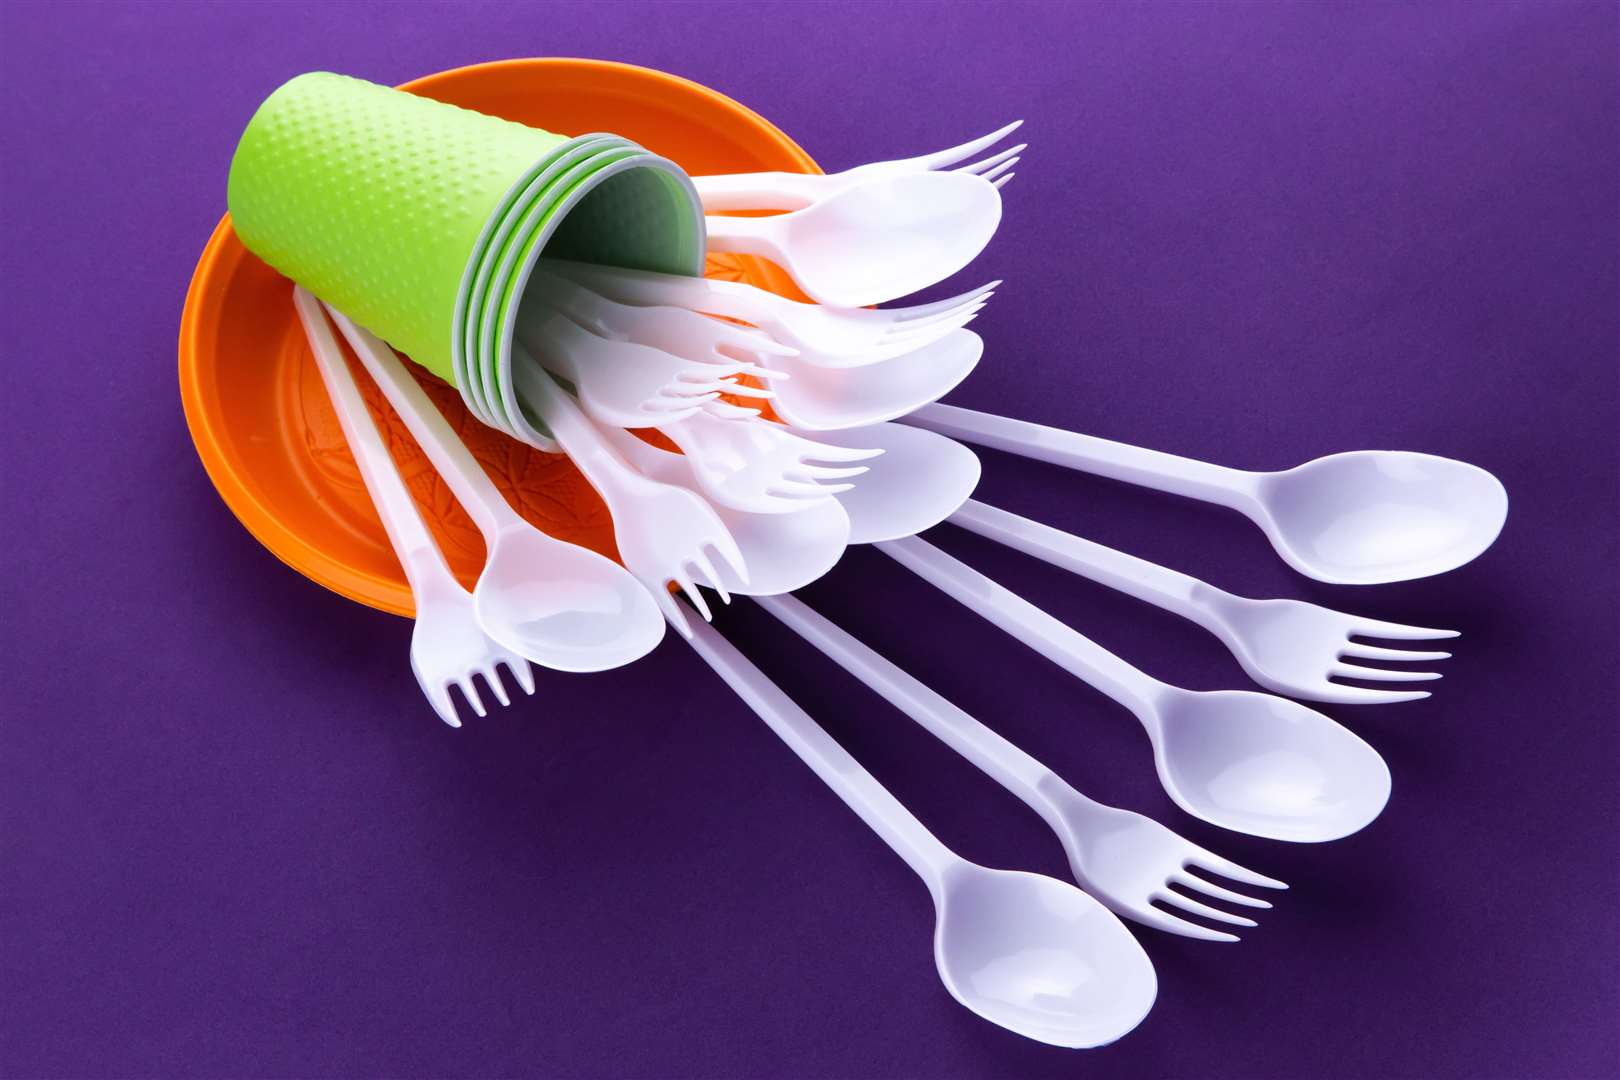 Single use disposable plastic tableware forms part of the consultation.